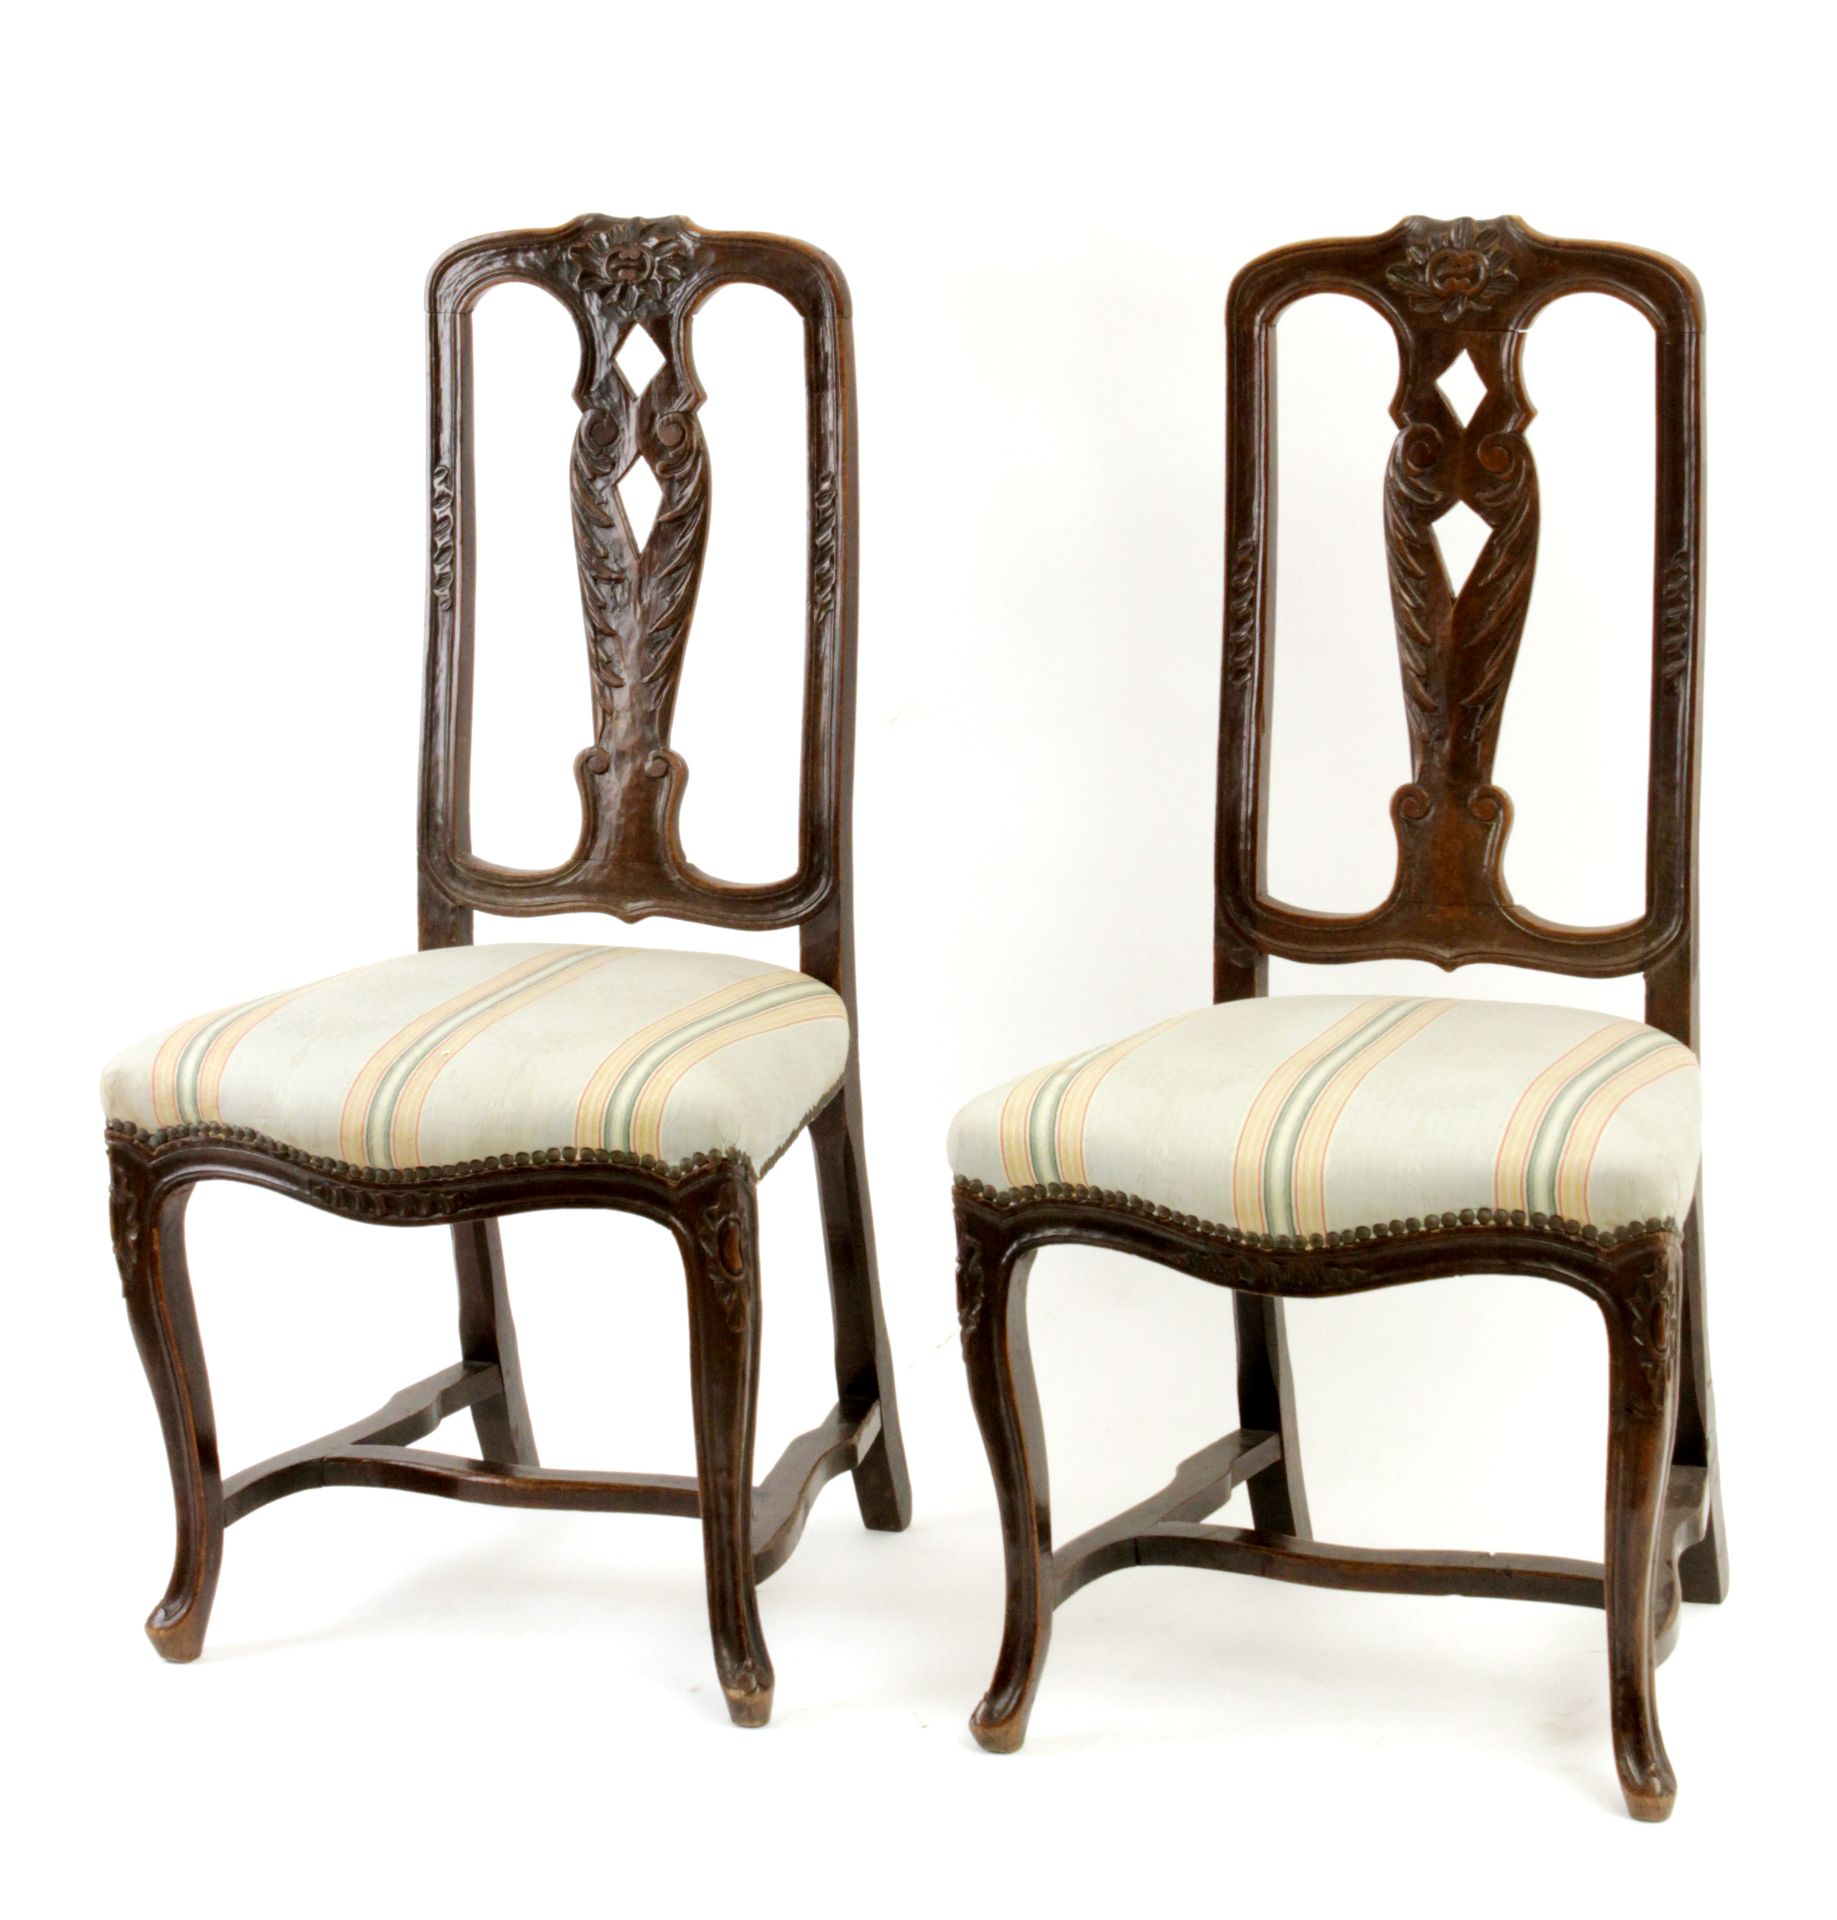 A pair of 19th century Portuguese walnut chairs - Image 2 of 3